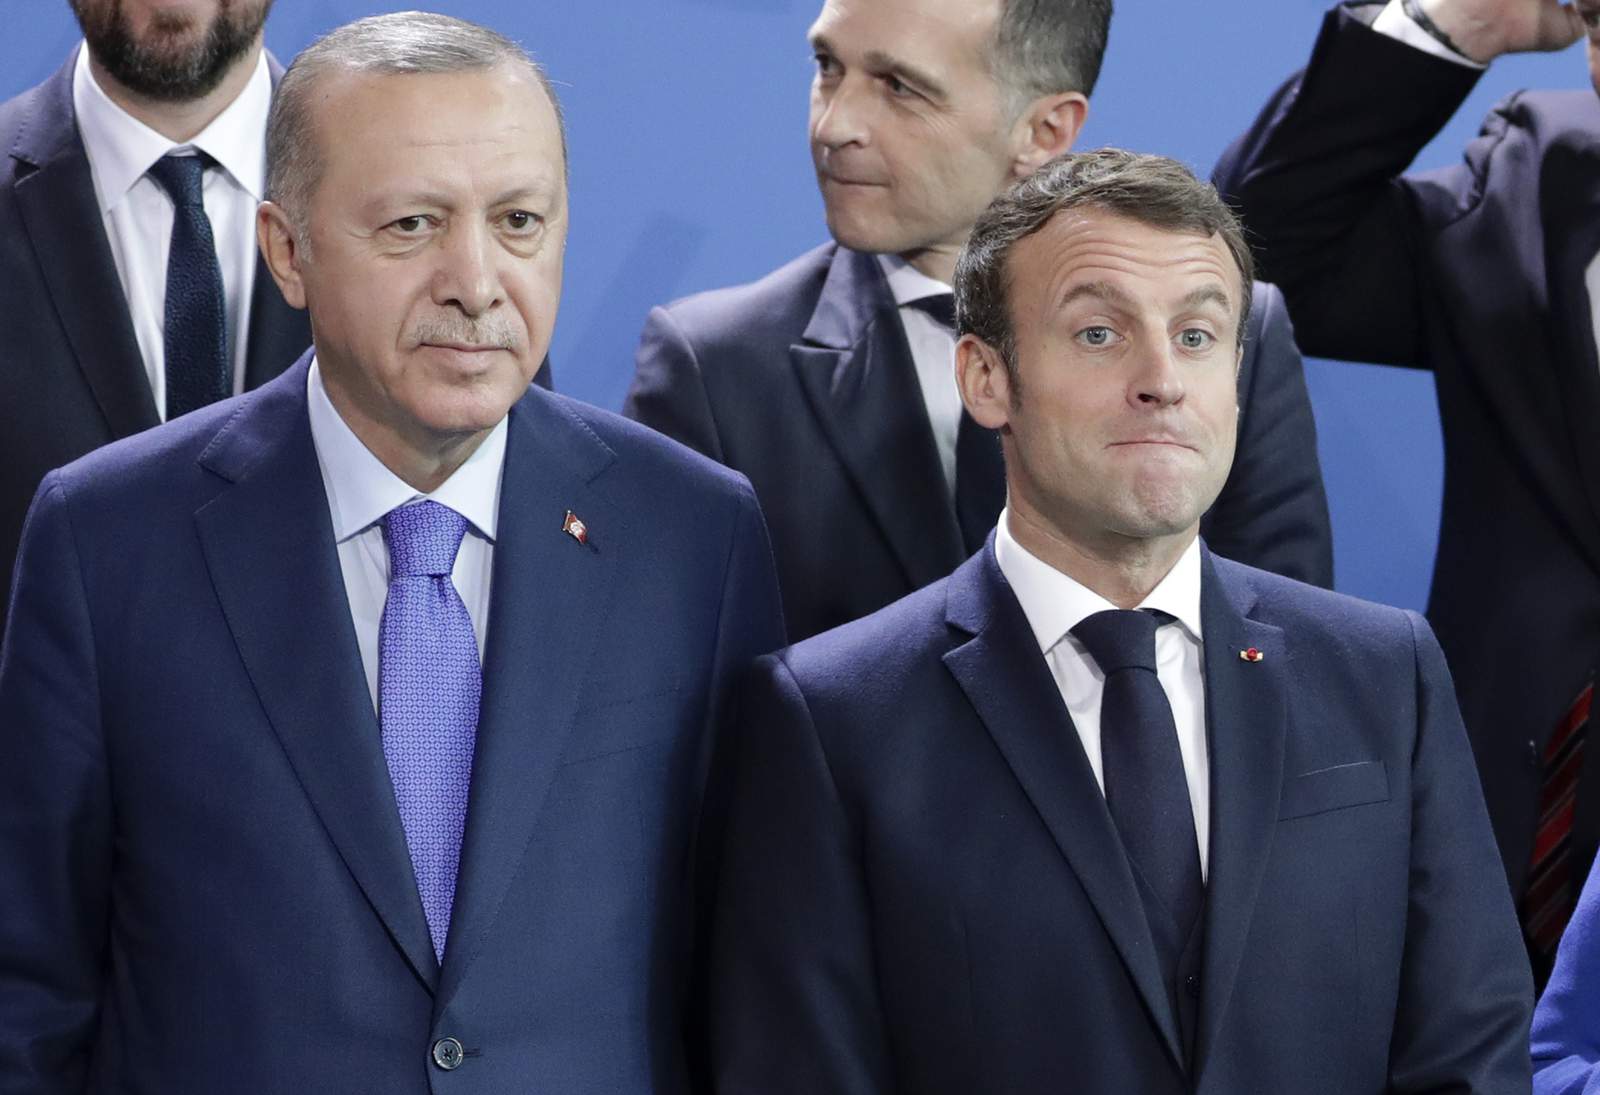 France reacts after Erdogan questions Macron's mental health